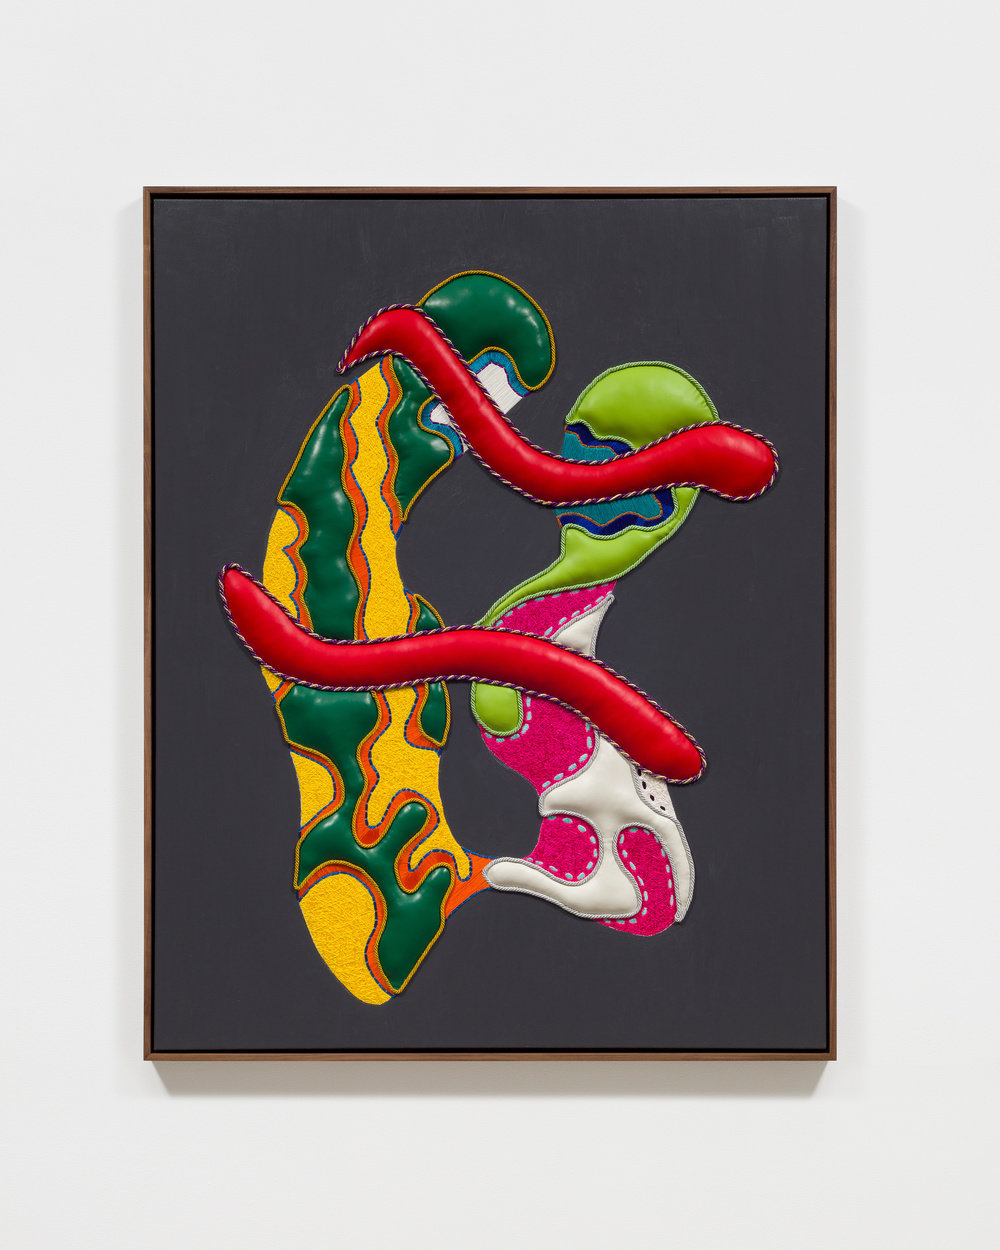 Cox, armed in arms, 2019, thread, acrylic, lamb leather, twisted in lipcord, poly stuffing on canvas in oak frame, 62 1 2 x 49 1 2 in., 158.75 x 125.73 cm, cnon 61.480